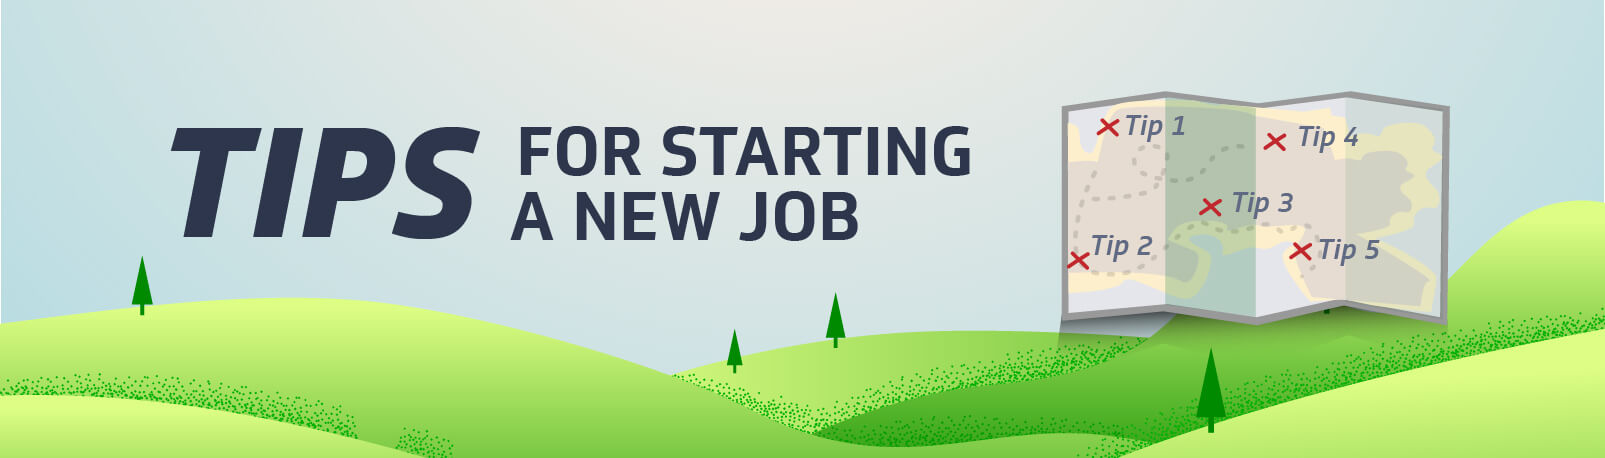 Tips for Starting a New Job